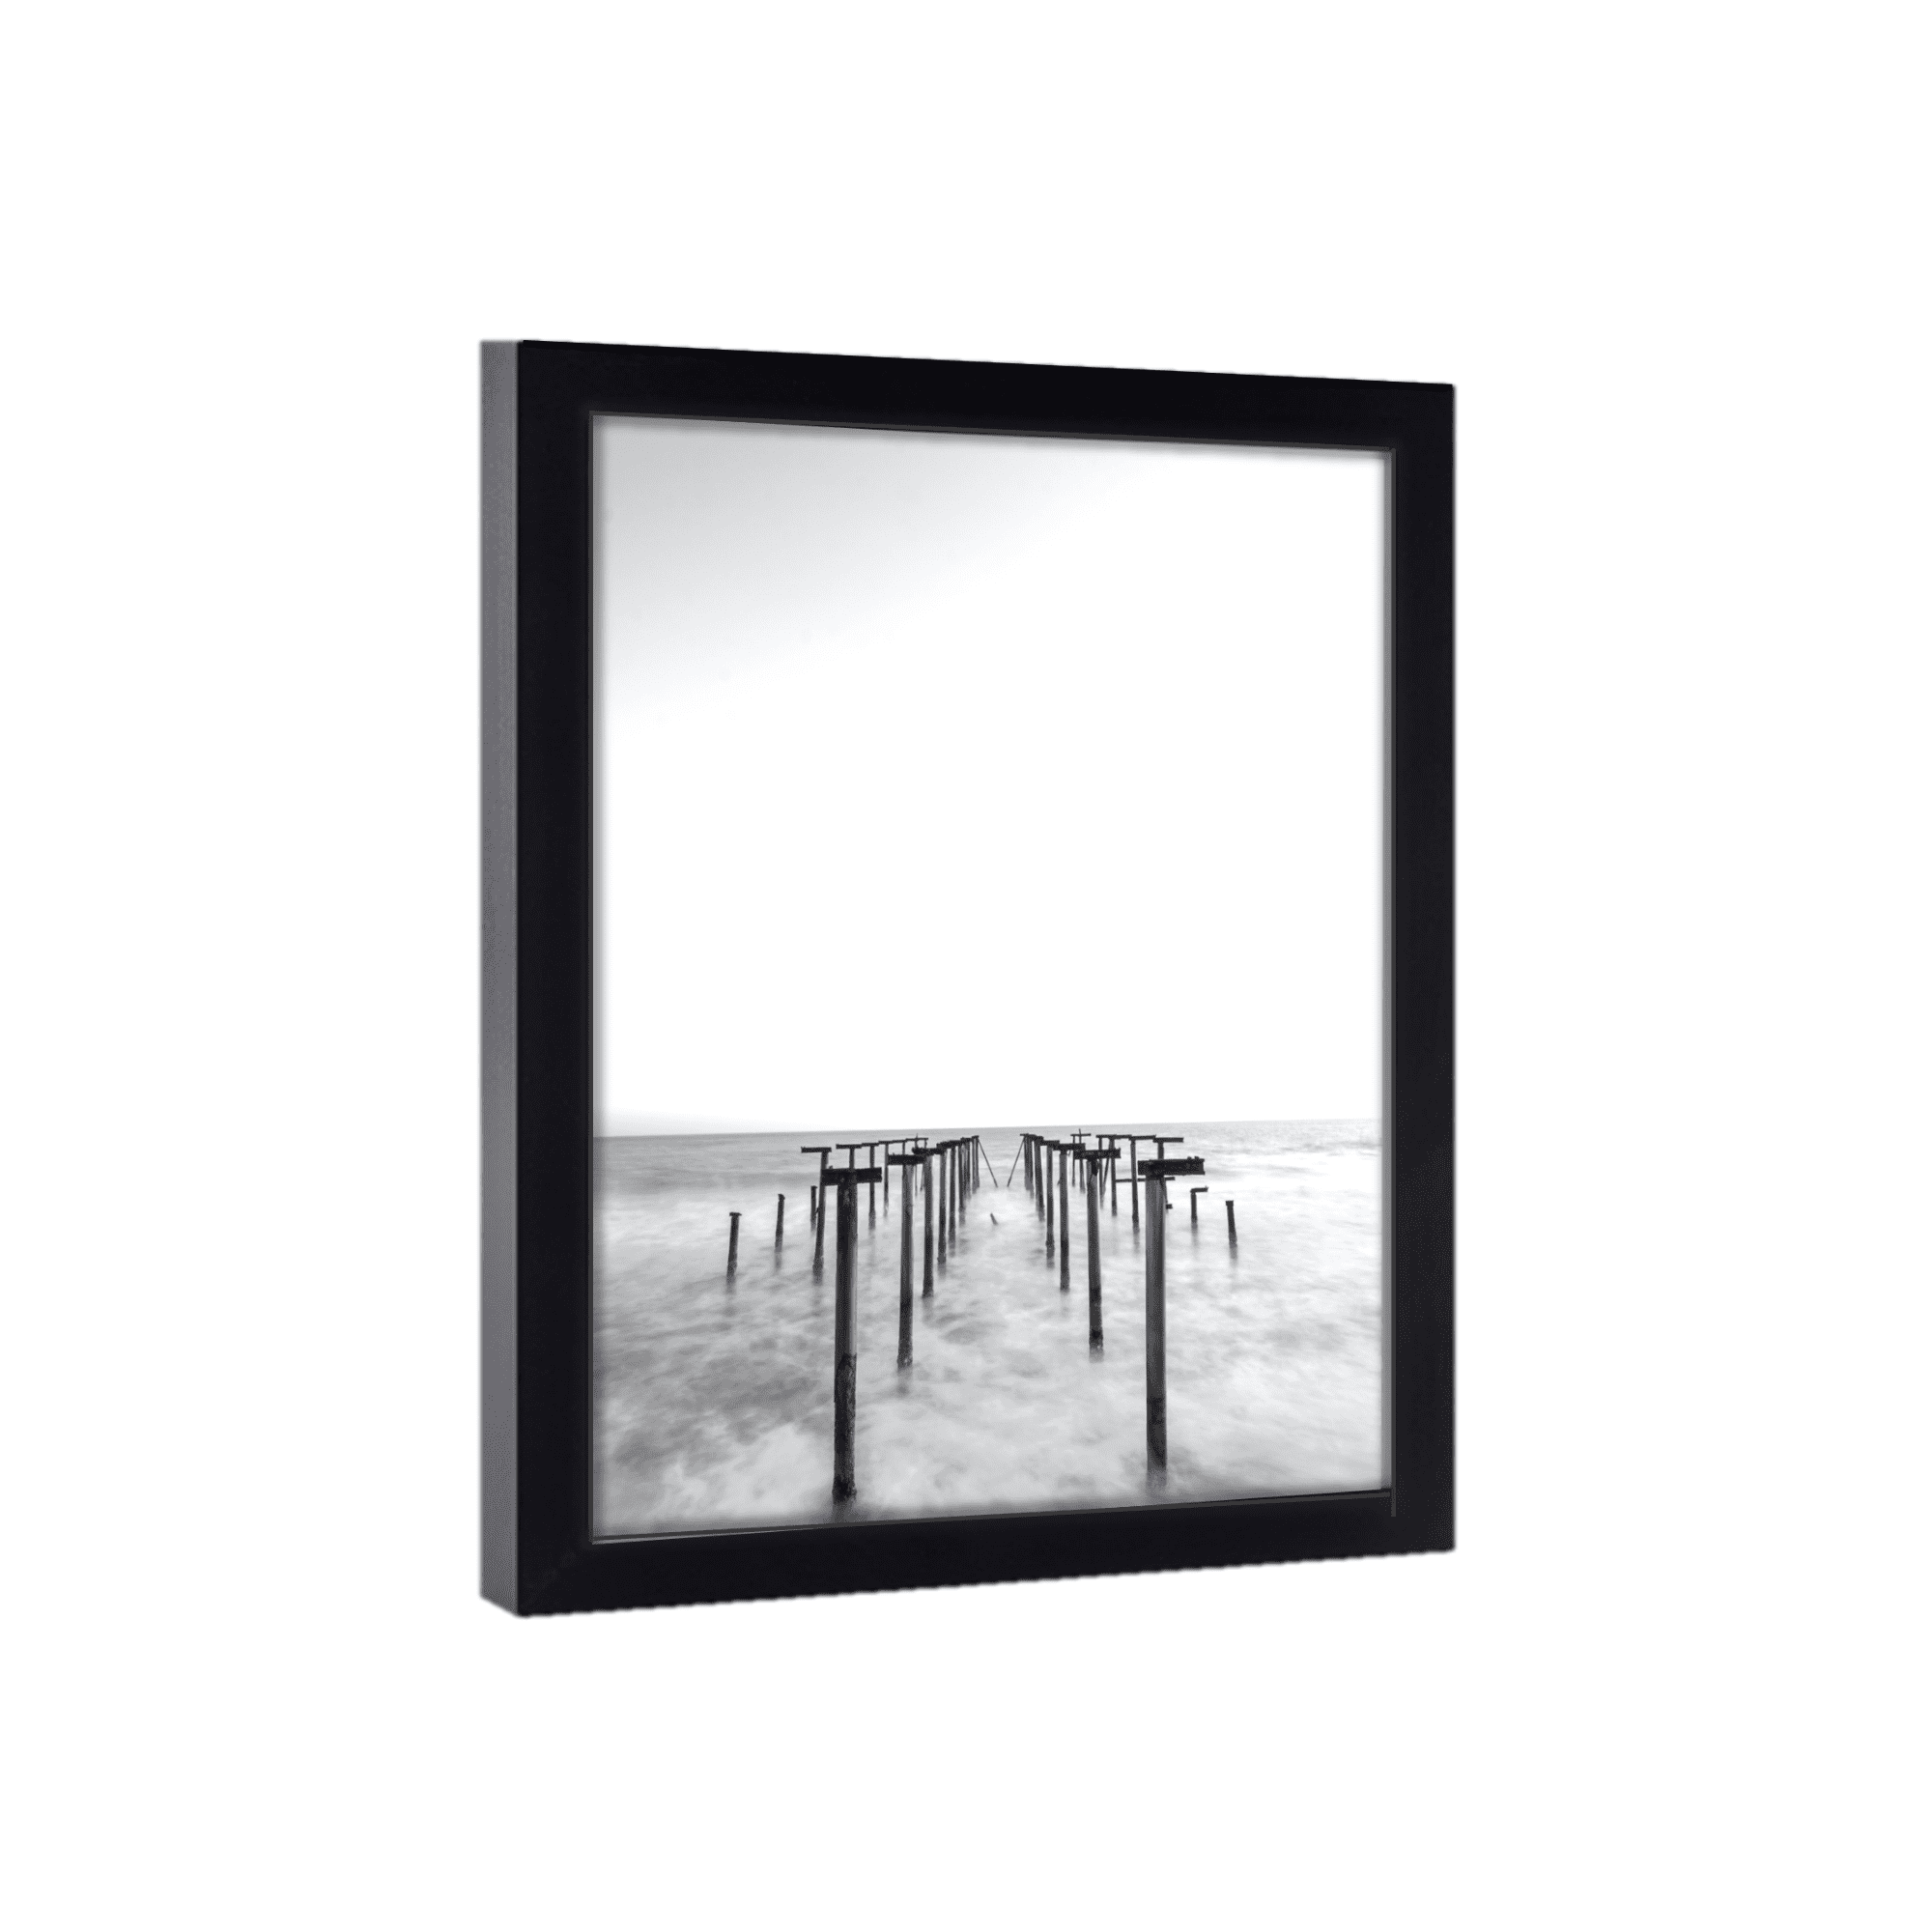 Flat Picture Frames Panoramic Photo Frames Large Small Poster Frames Black White 